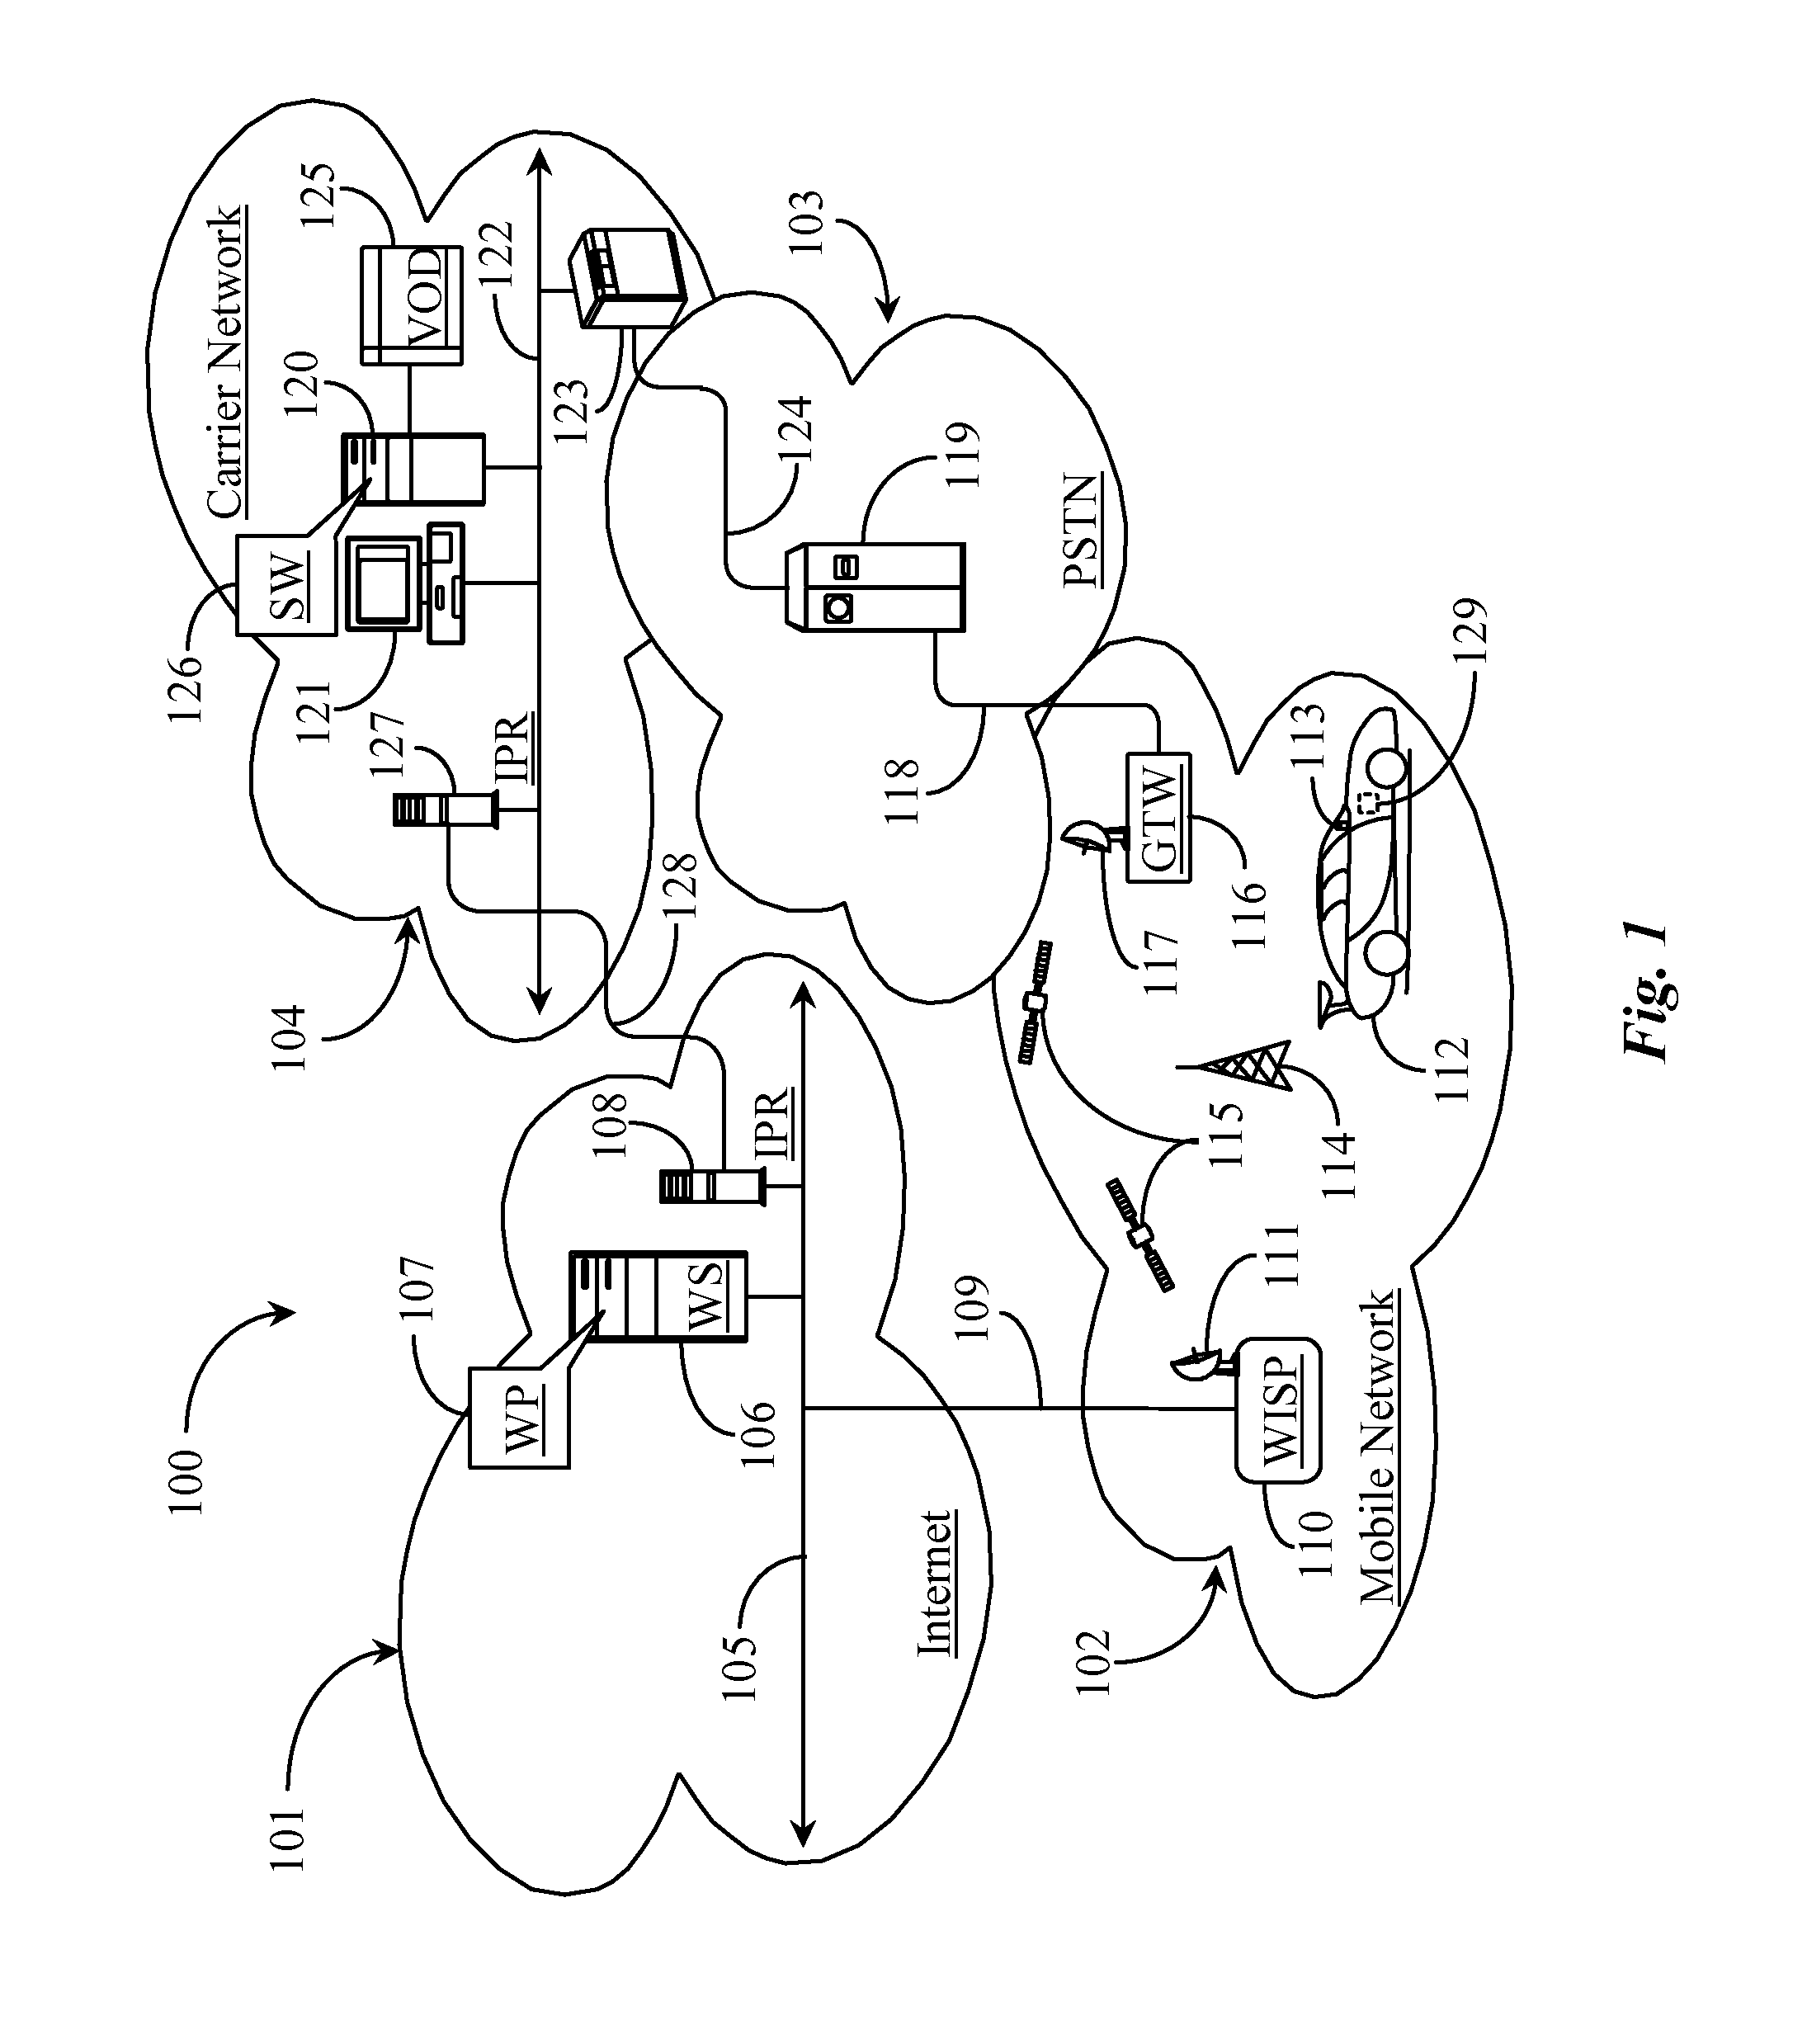 Driver Identification System and Methods